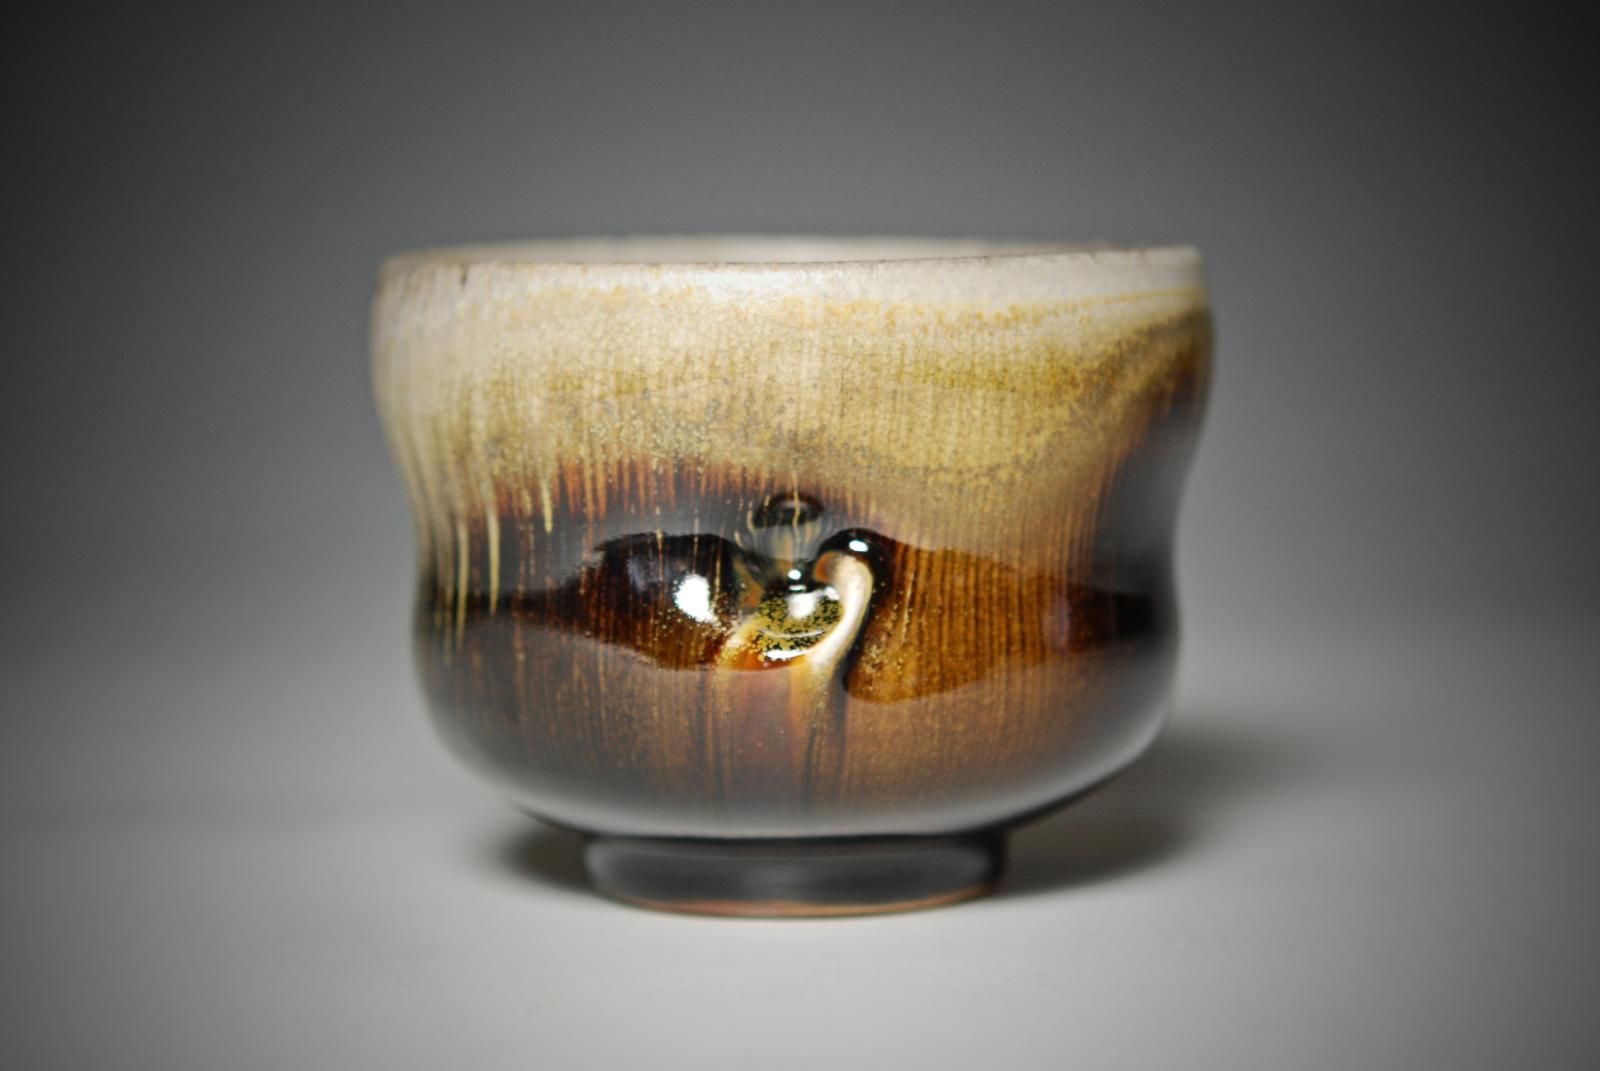 Anagama wood fired chawan by Chris Gustin